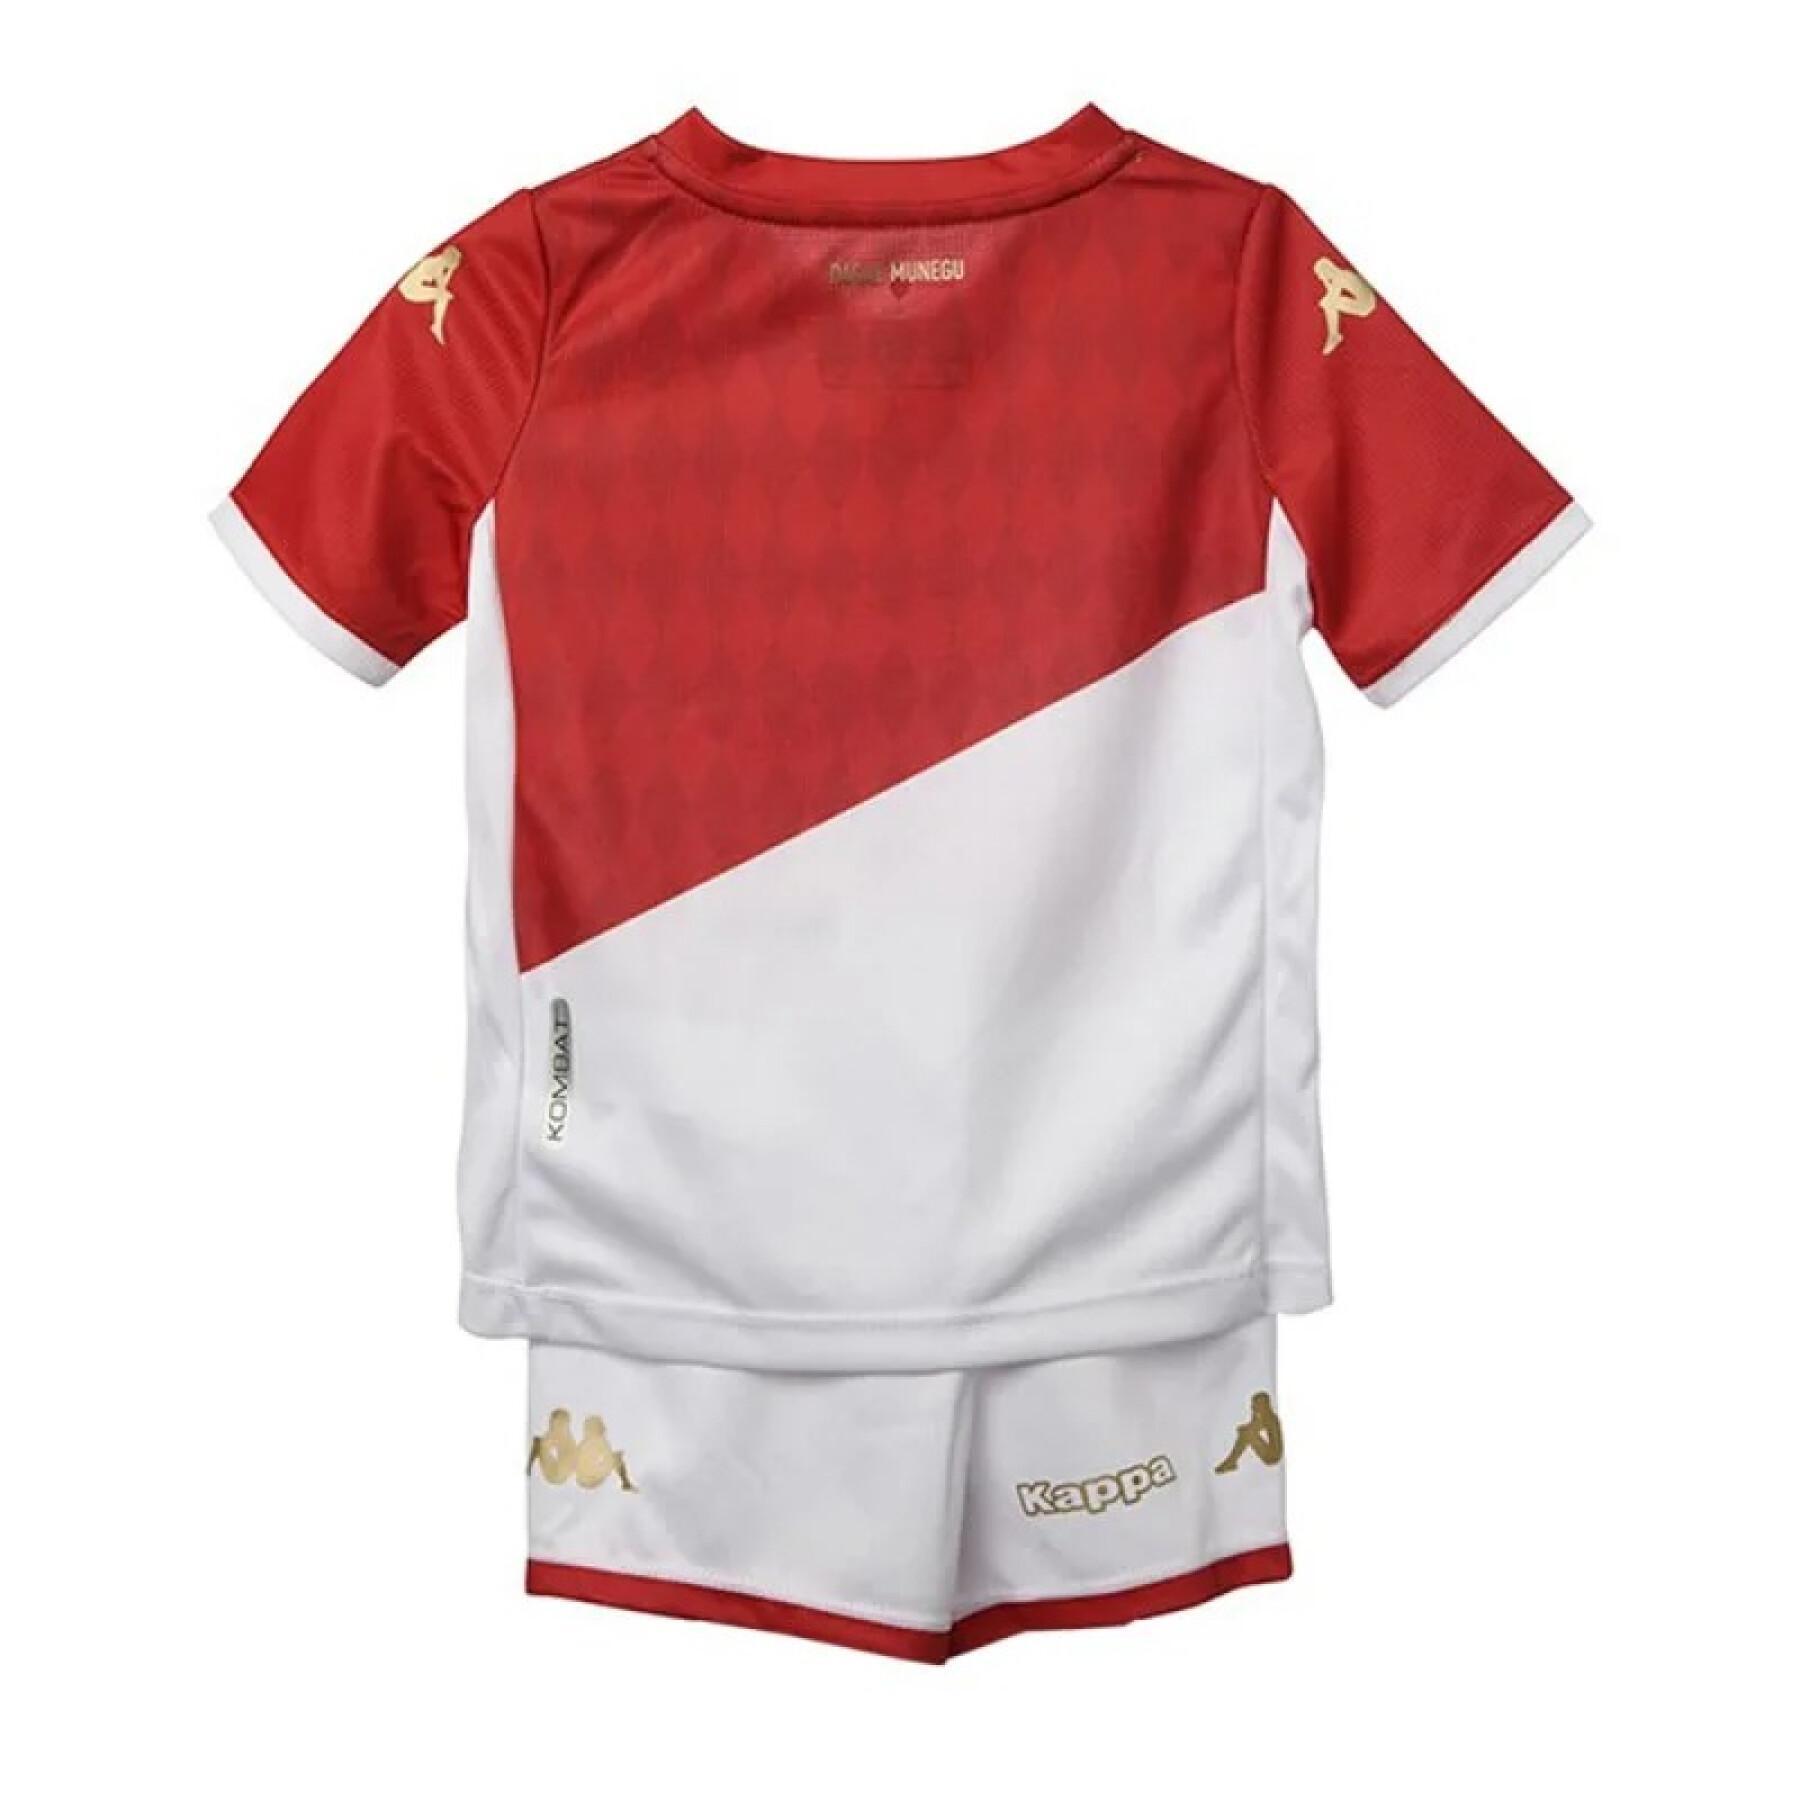 Child Home Package AS Monaco 2019/20 set